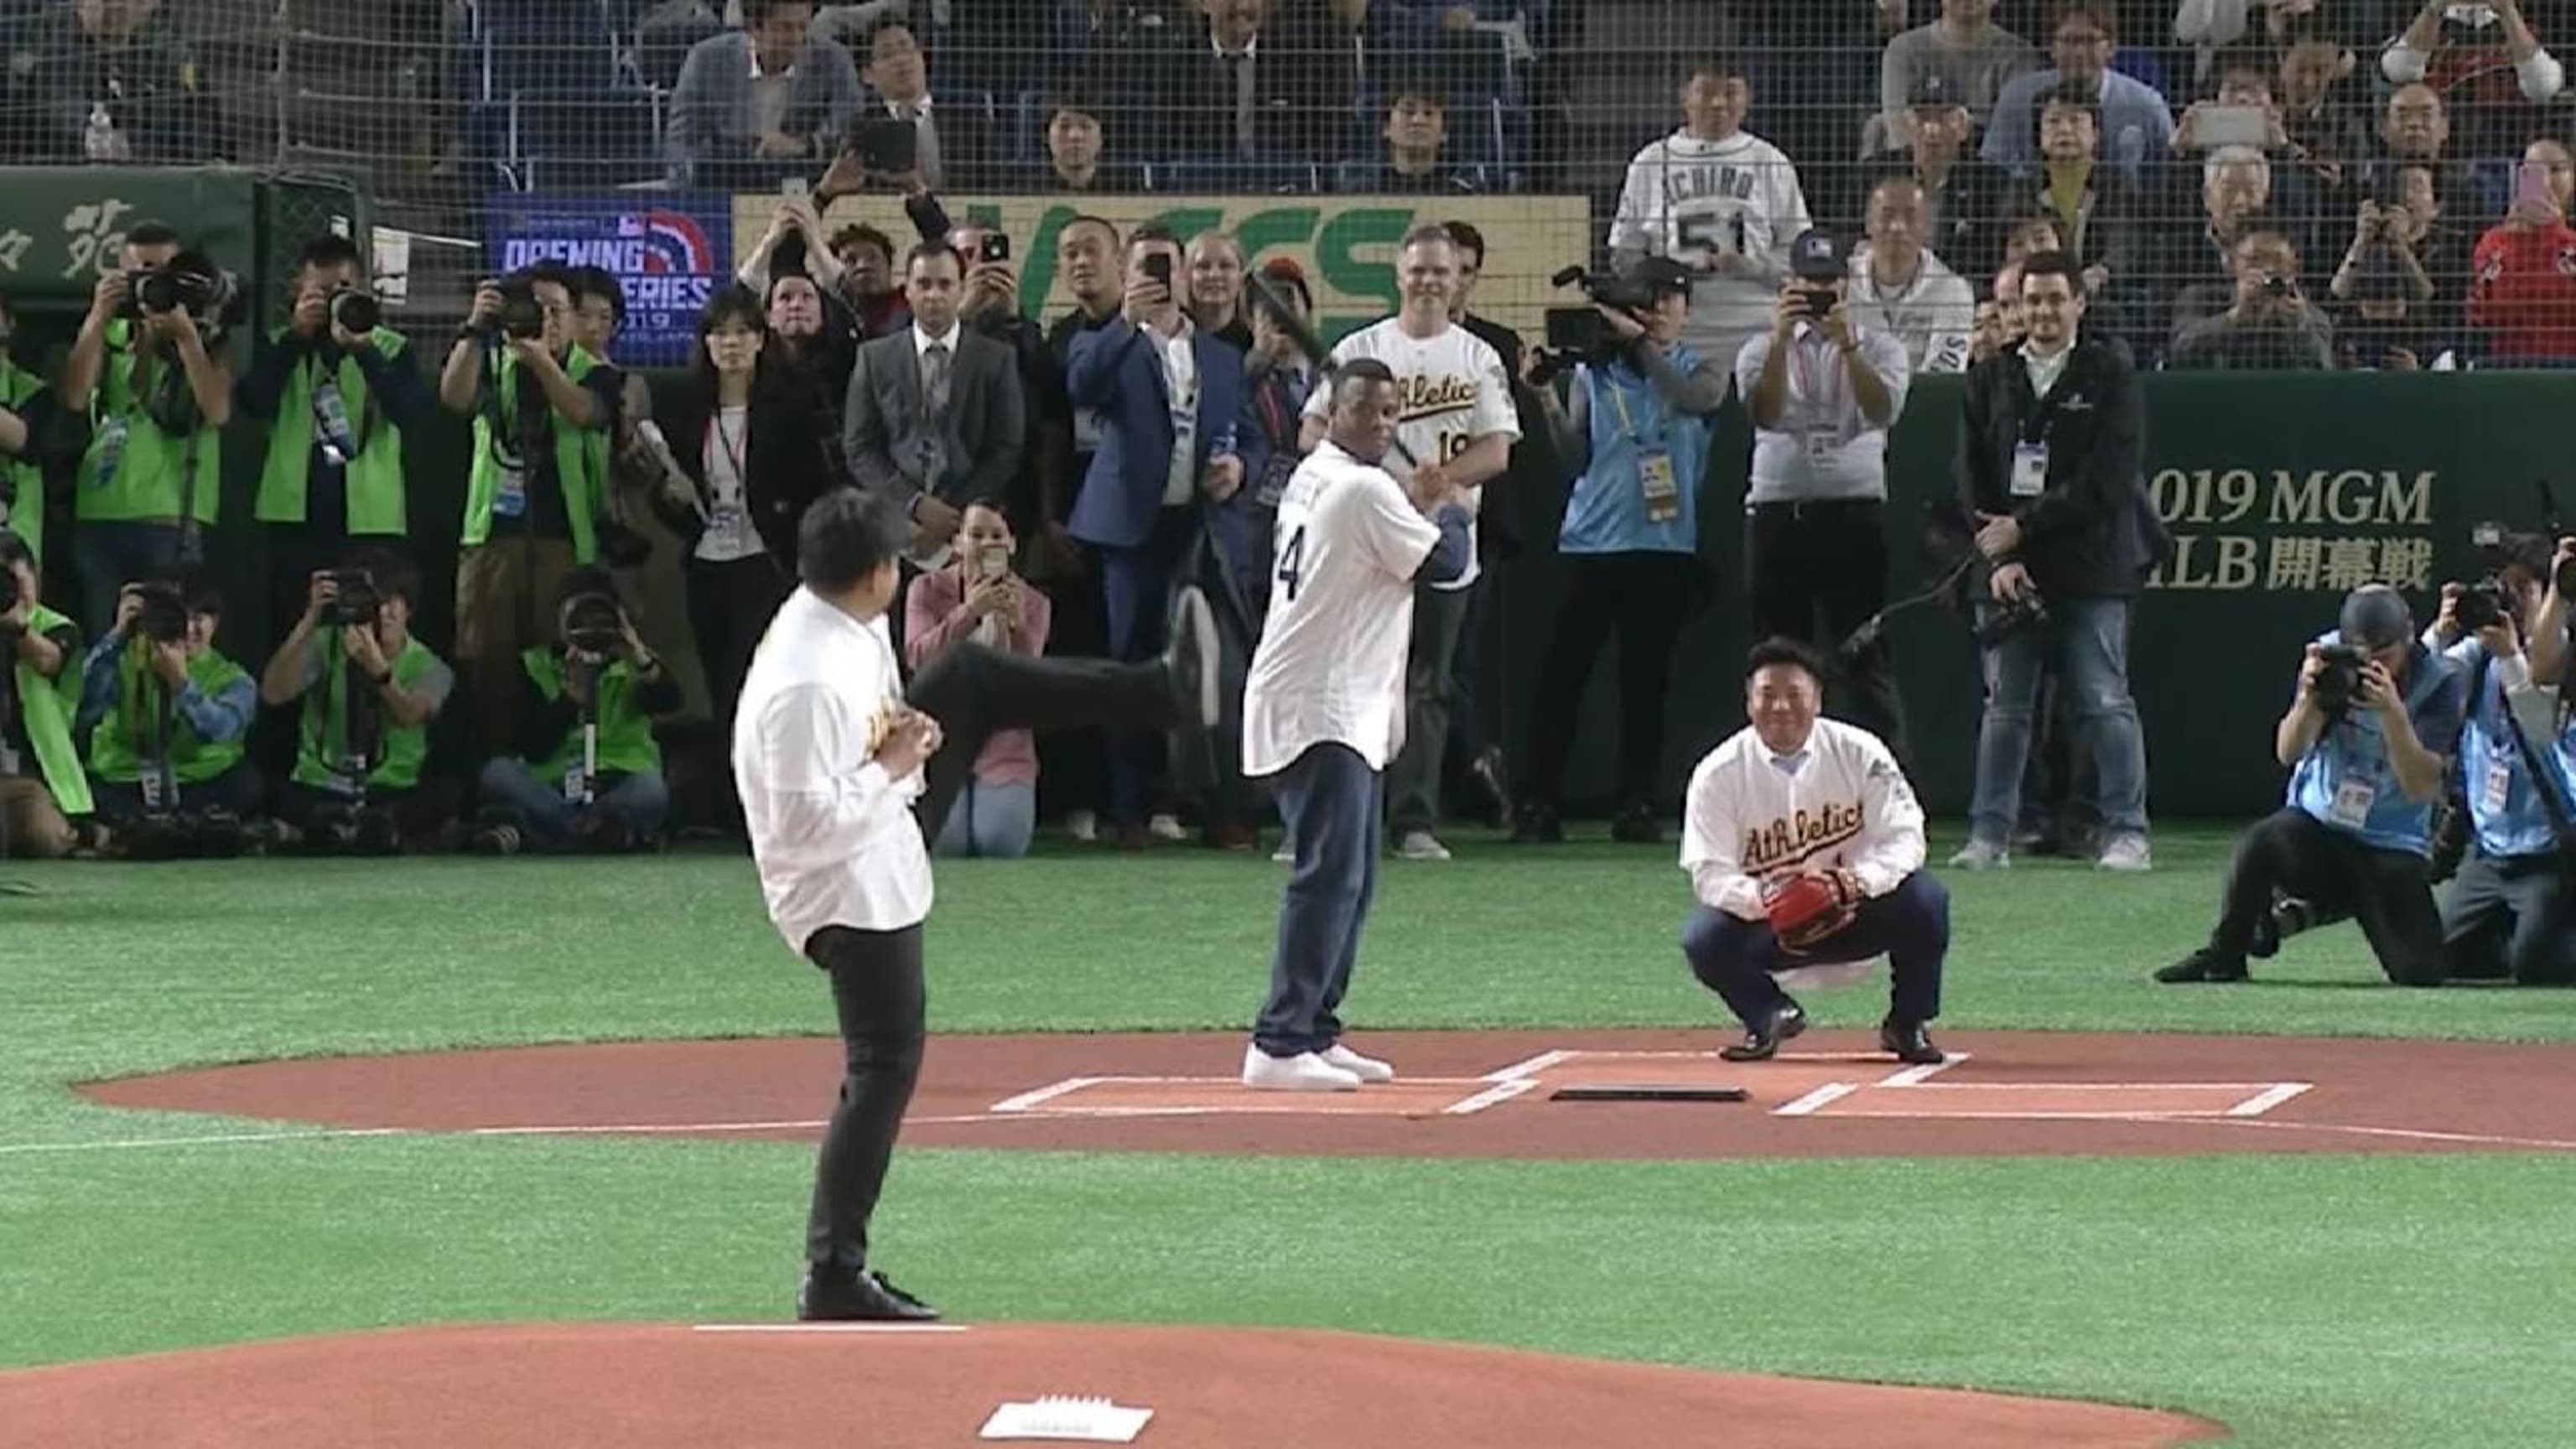 Ken Griffey Jr stood in for the first pitch MLB